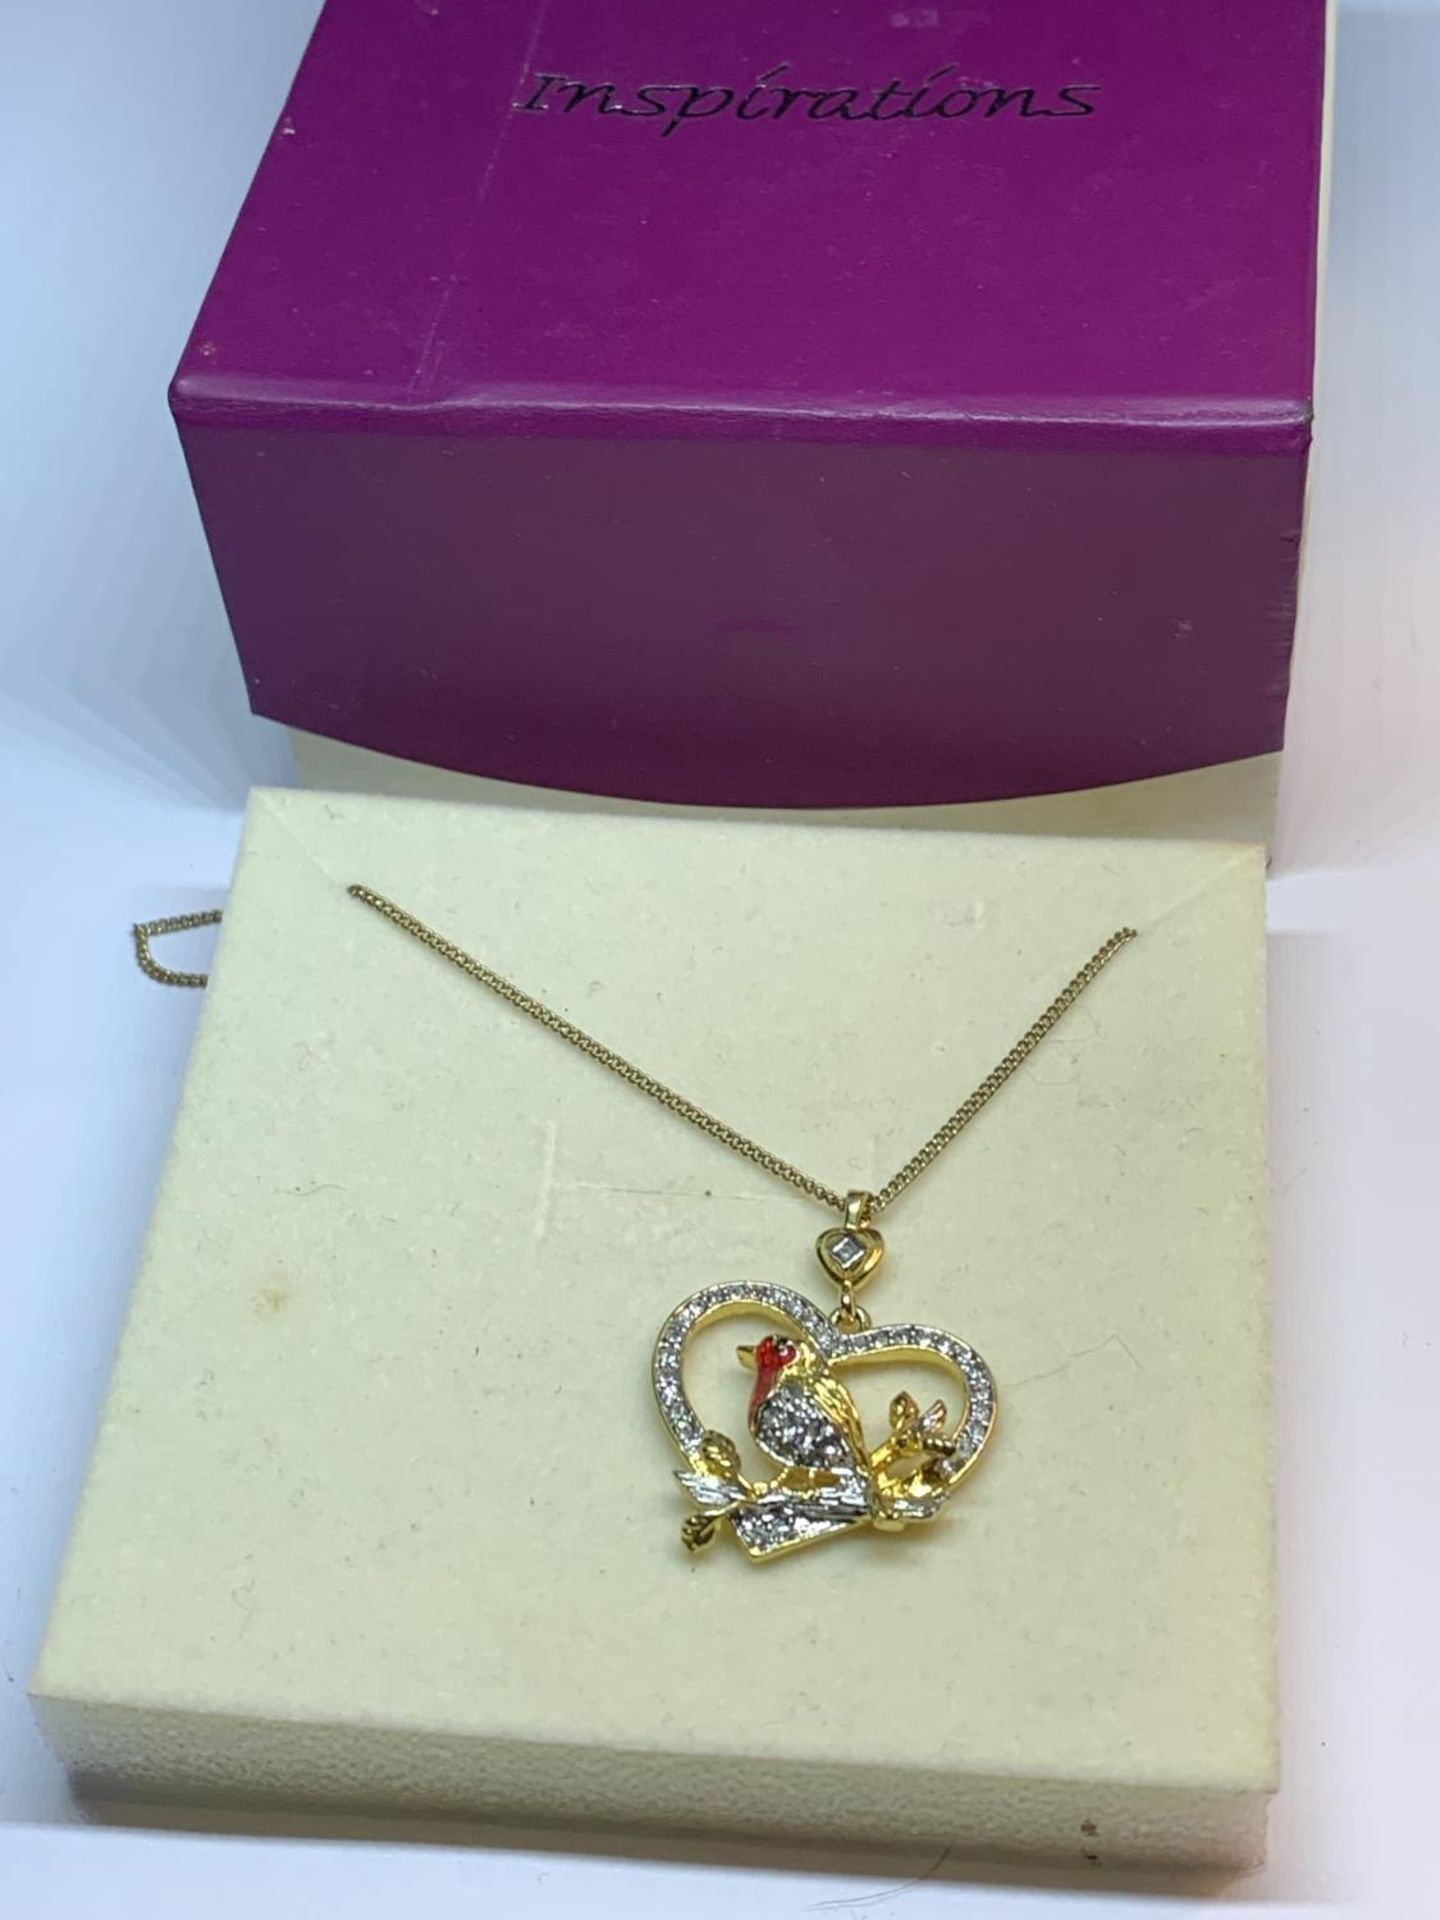 A NECKLACE WITH A CRYSTAL ROBIN PENDANT IN A PRESENTATION BOX